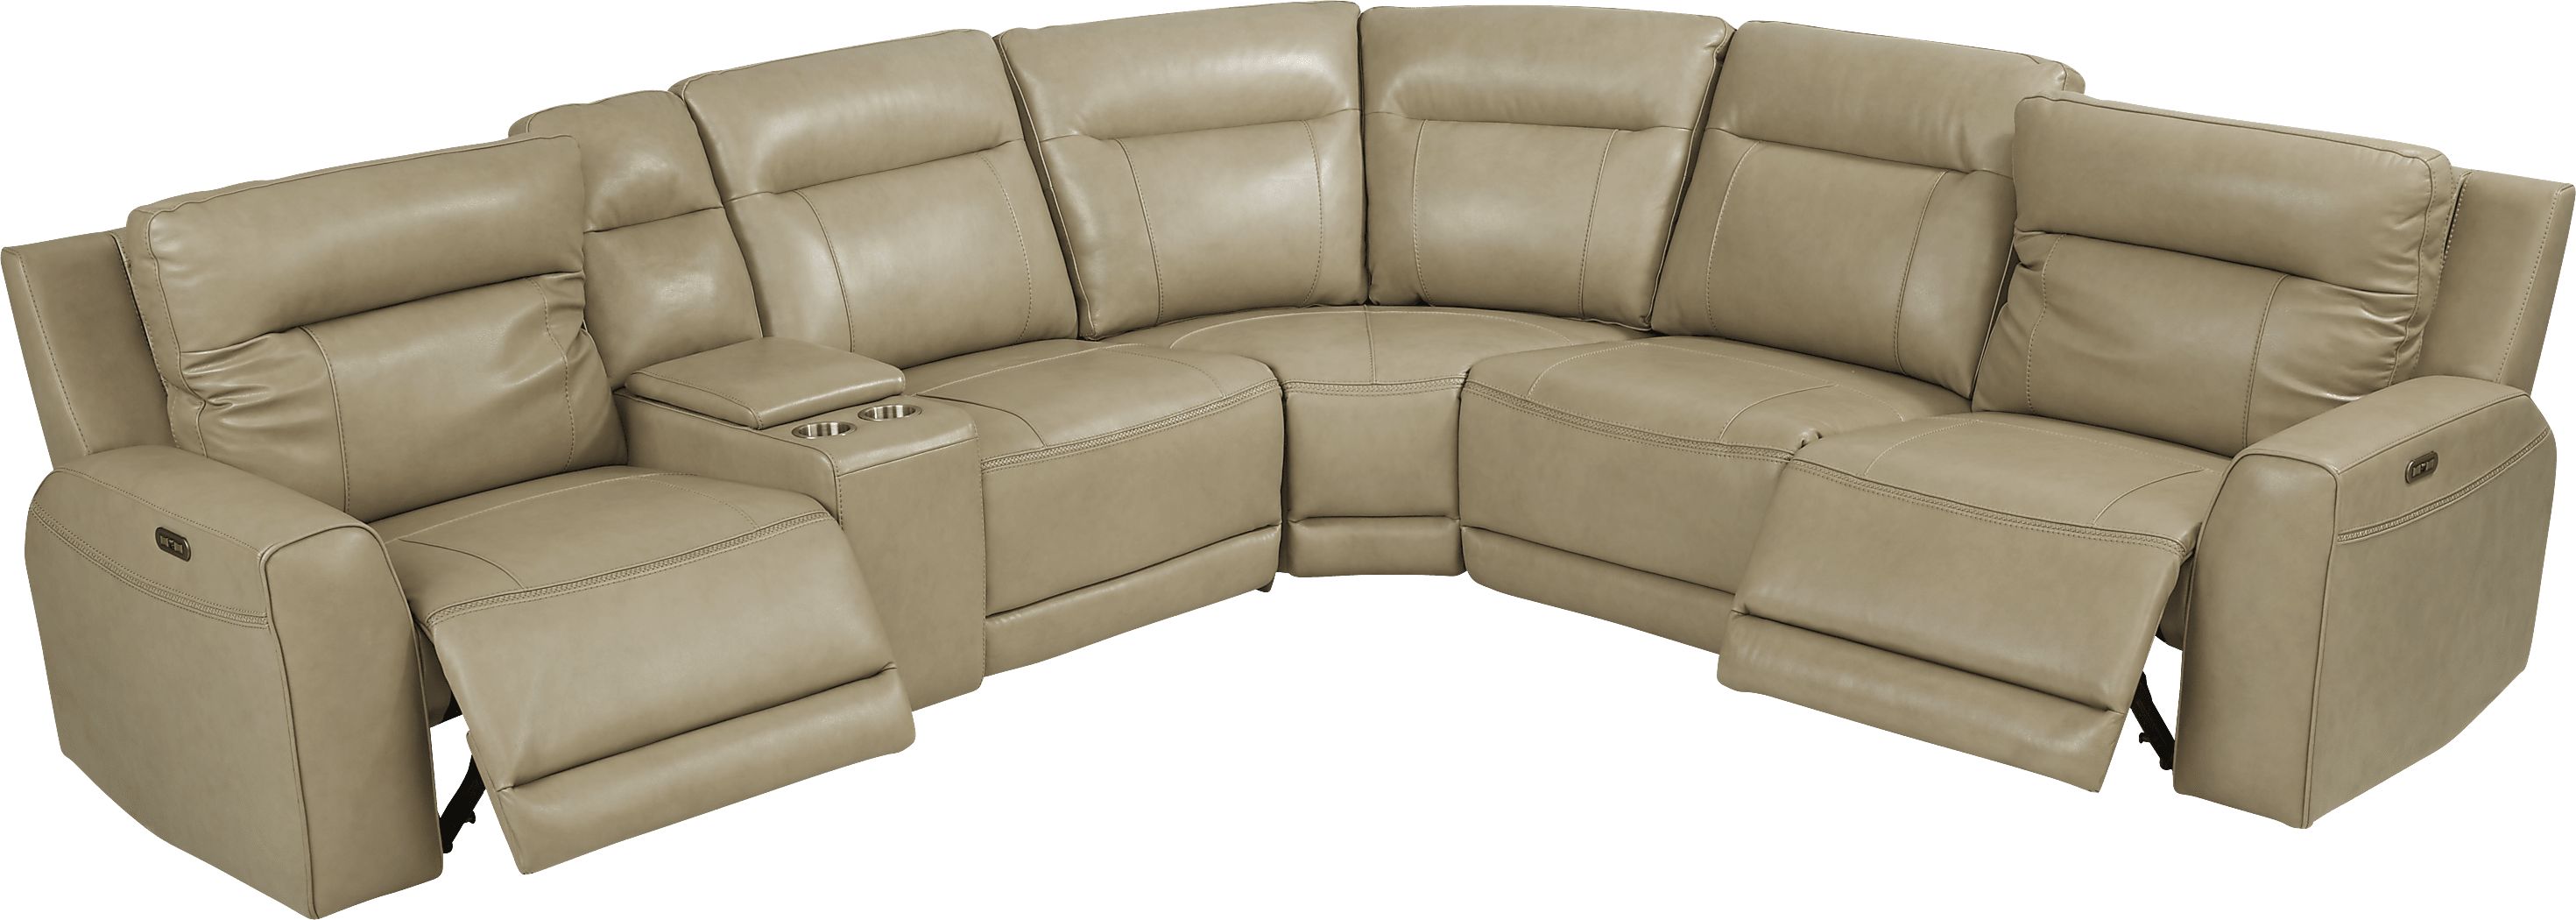 Bargotti Stone Leather 6 Pc Dual Power Reclining Sectional